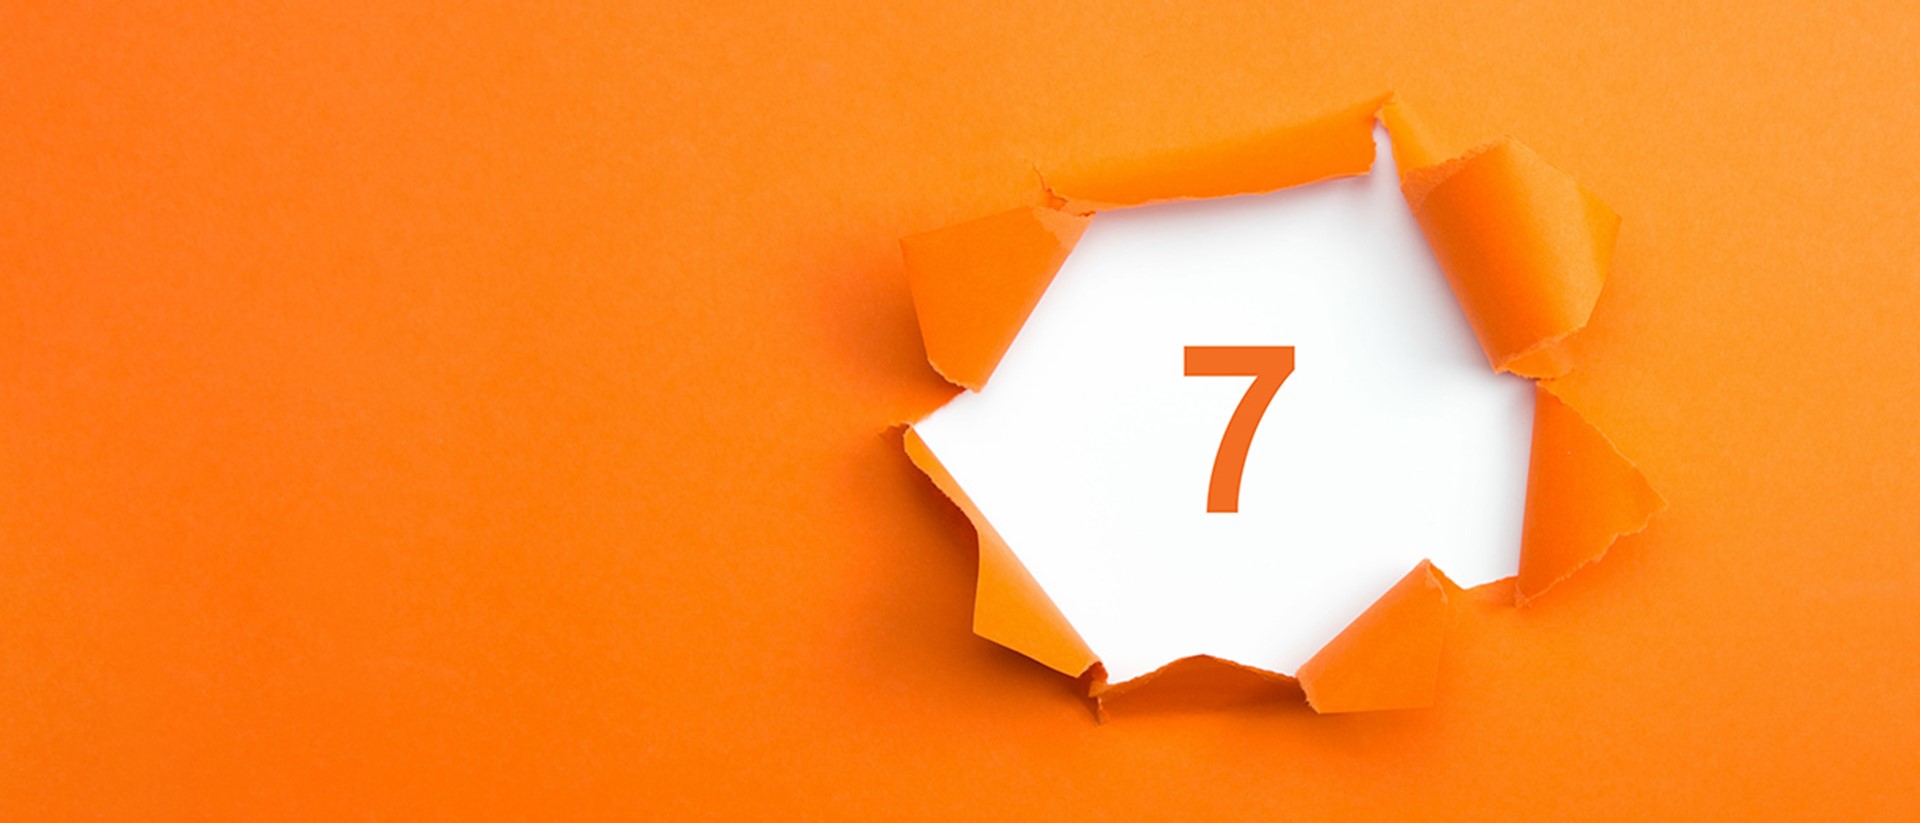 Image of the number 7 on an orange background